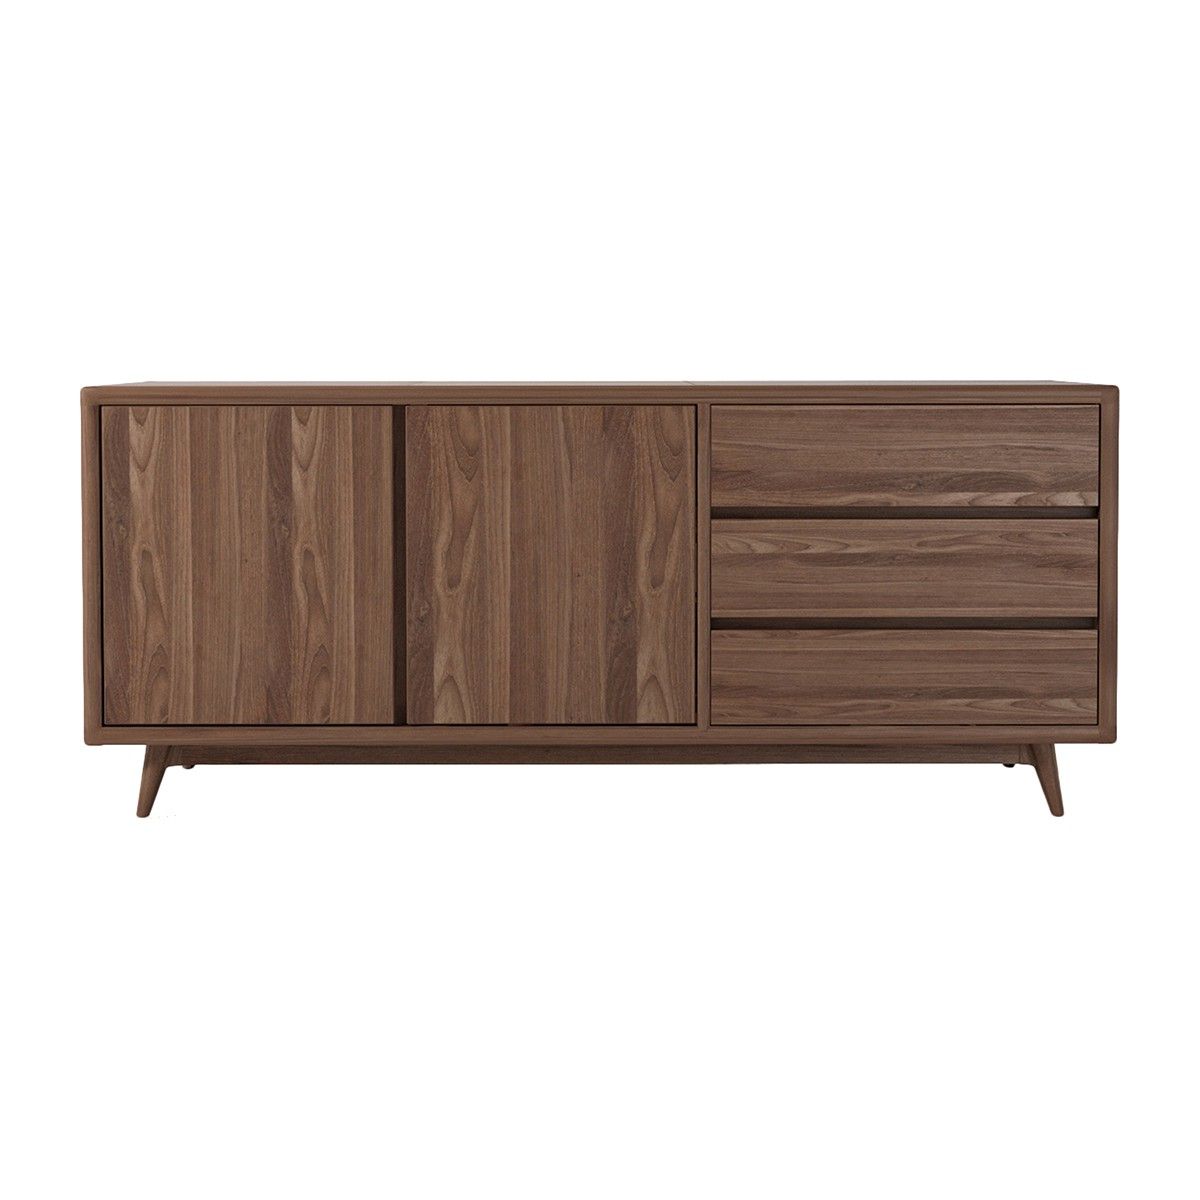 Walnut Finish Contempo Sideboards With Fashionable Karpenter – Vintage Sideboard – Modern Sideboards Buy Your Furniture (View 19 of 20)